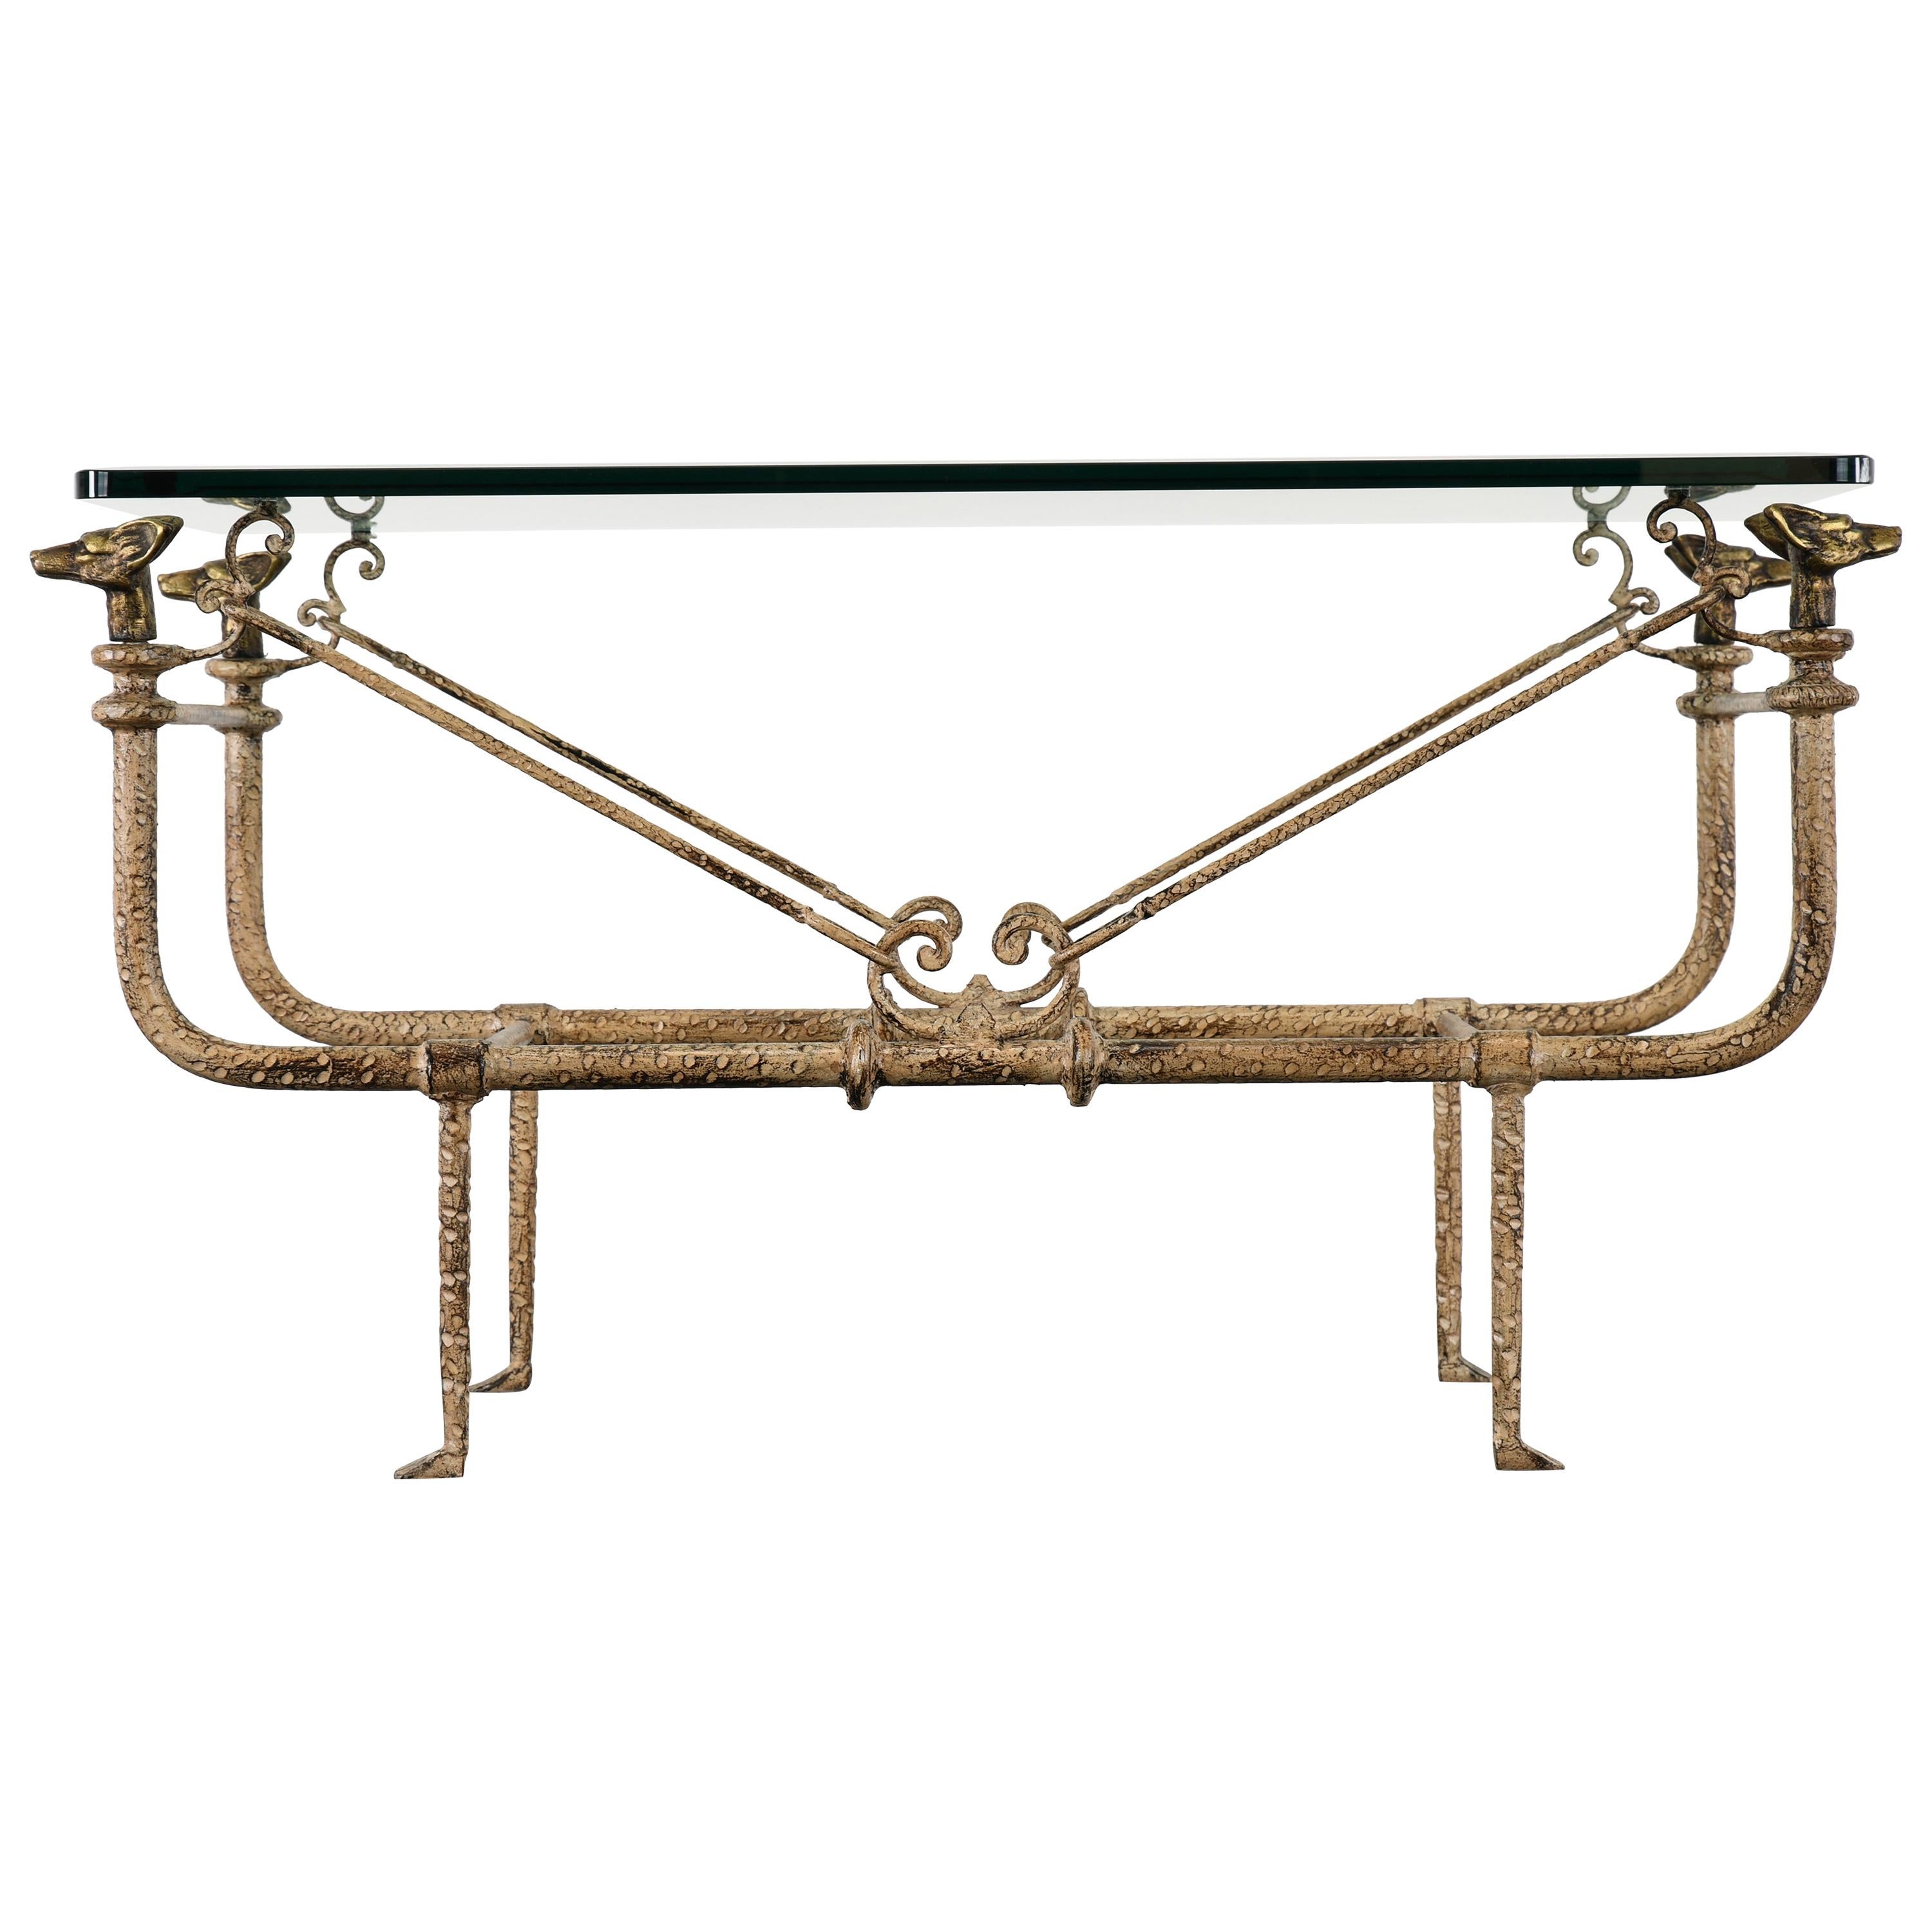 Giacometti Style Wrought Iron Coffee Table by Paul Ferrante, 1980s